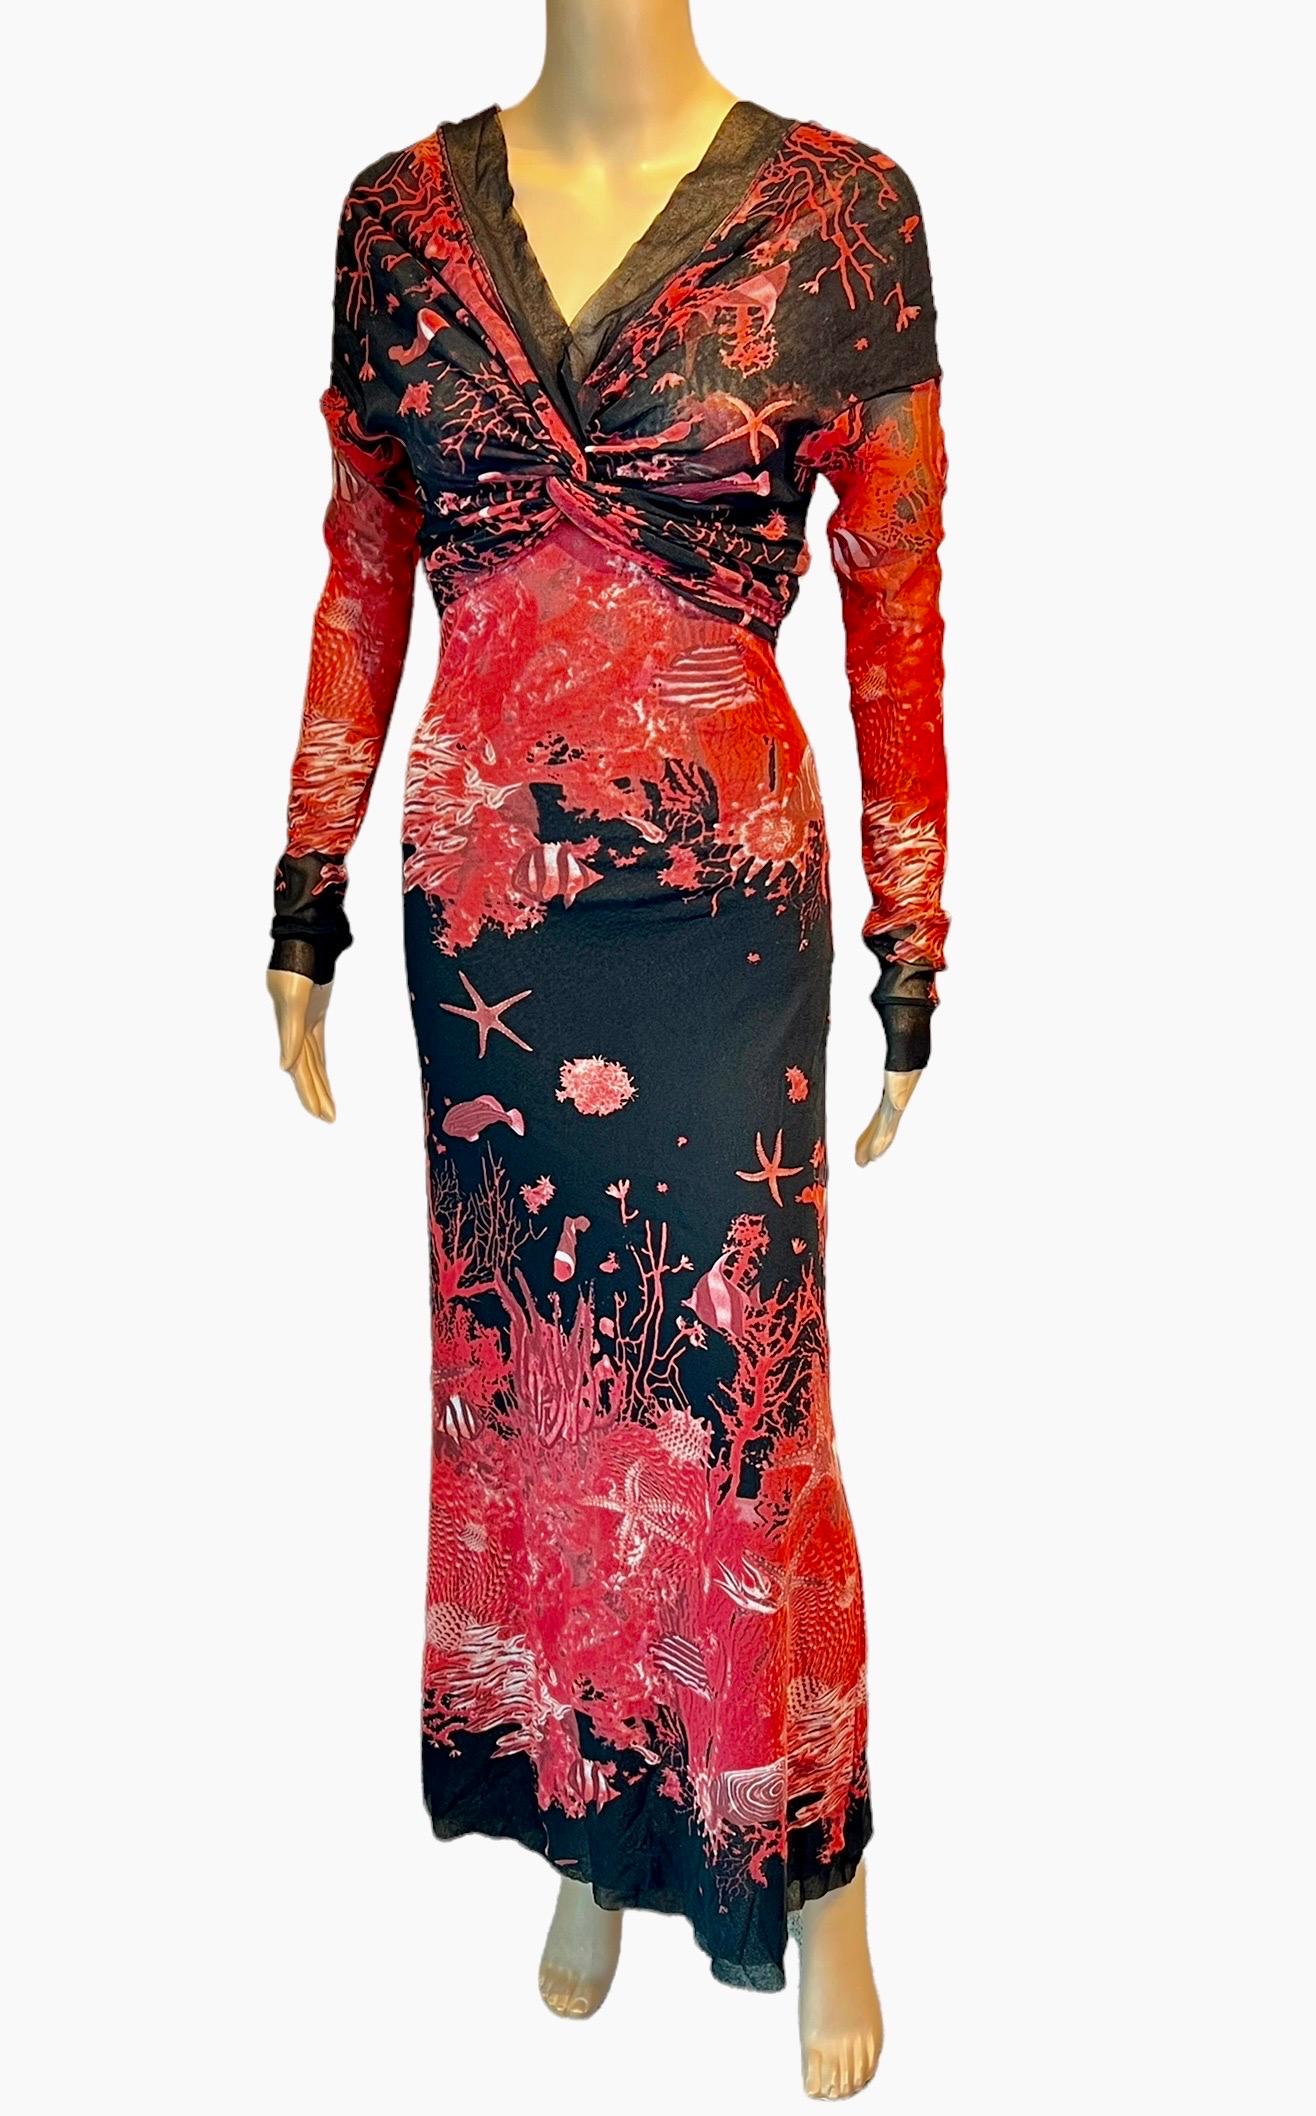 Jean Paul Gaultier Soleil S/S 1999 Sea Life Print Off Shoulder Mesh Maxi Dress In Good Condition For Sale In Naples, FL